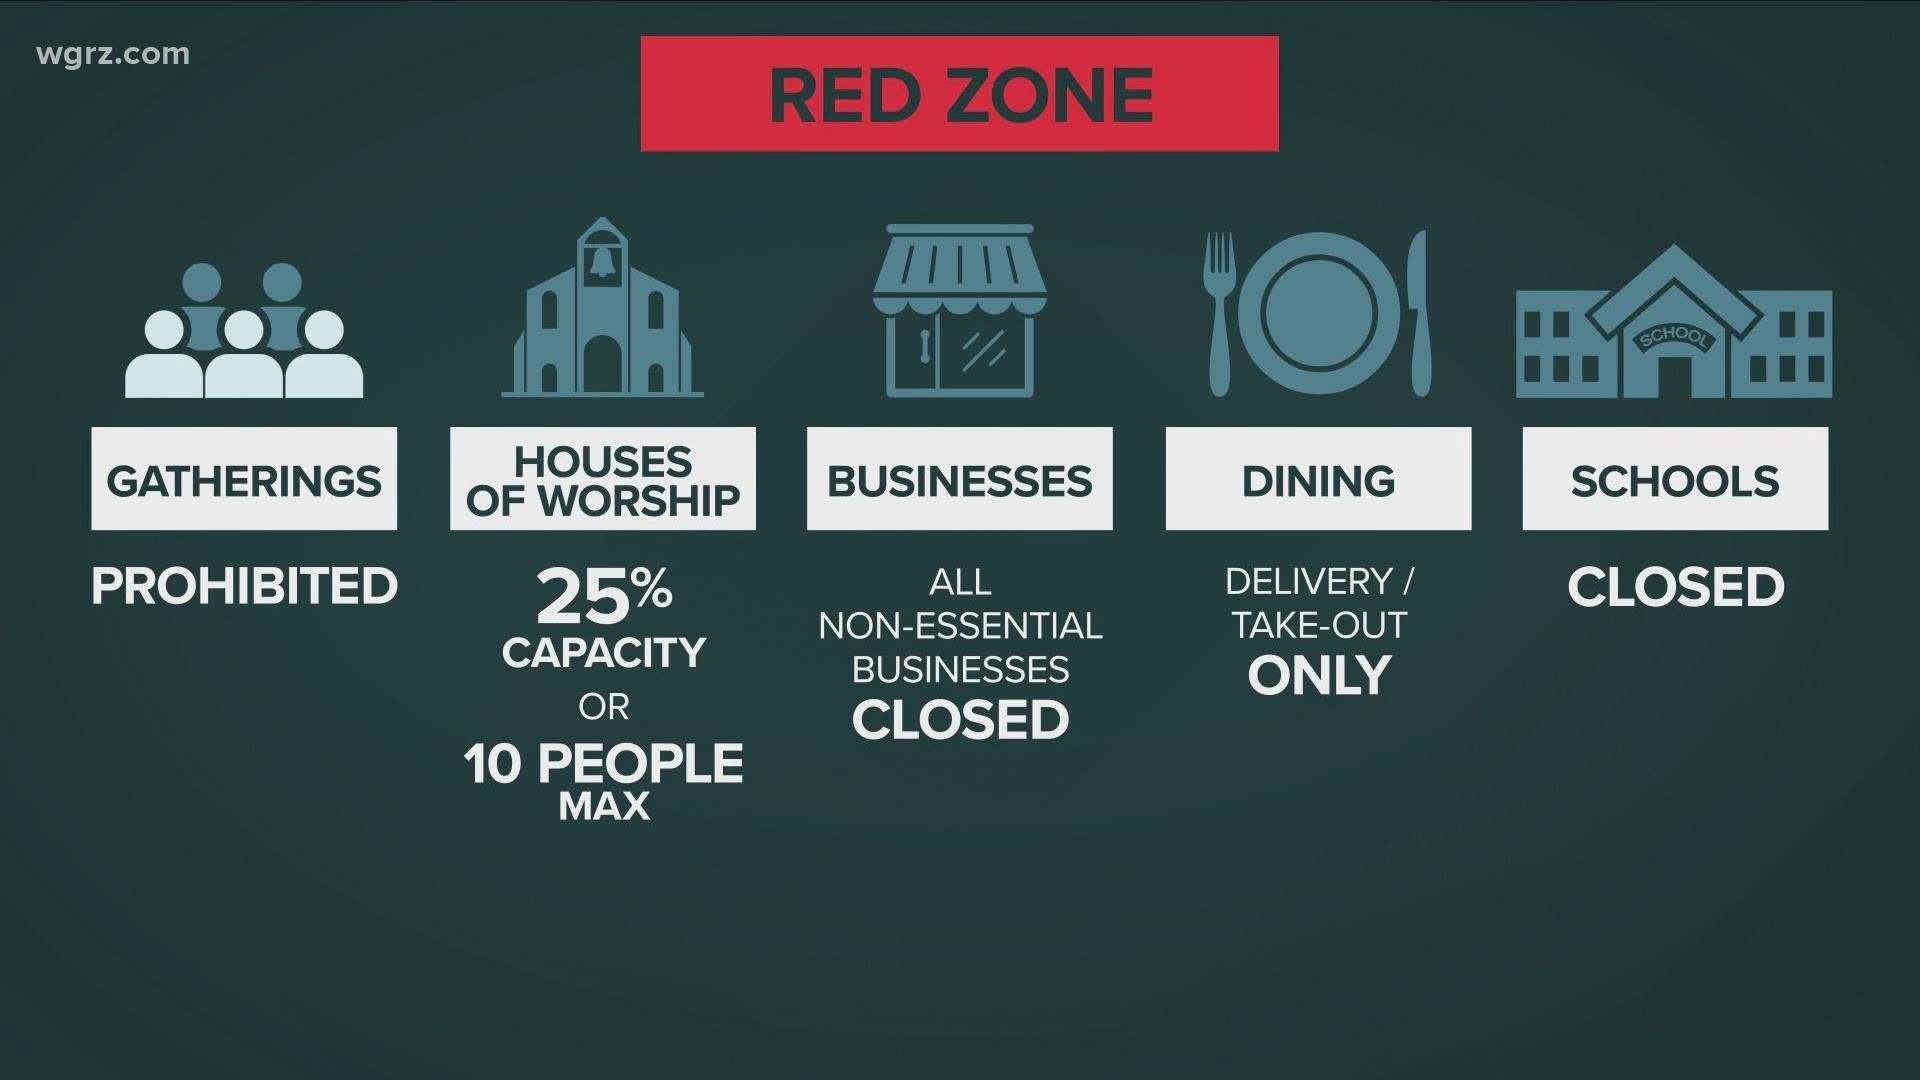 if we go to red: no gatherings. No non-essential businesses will be open. No dining at restaurants.